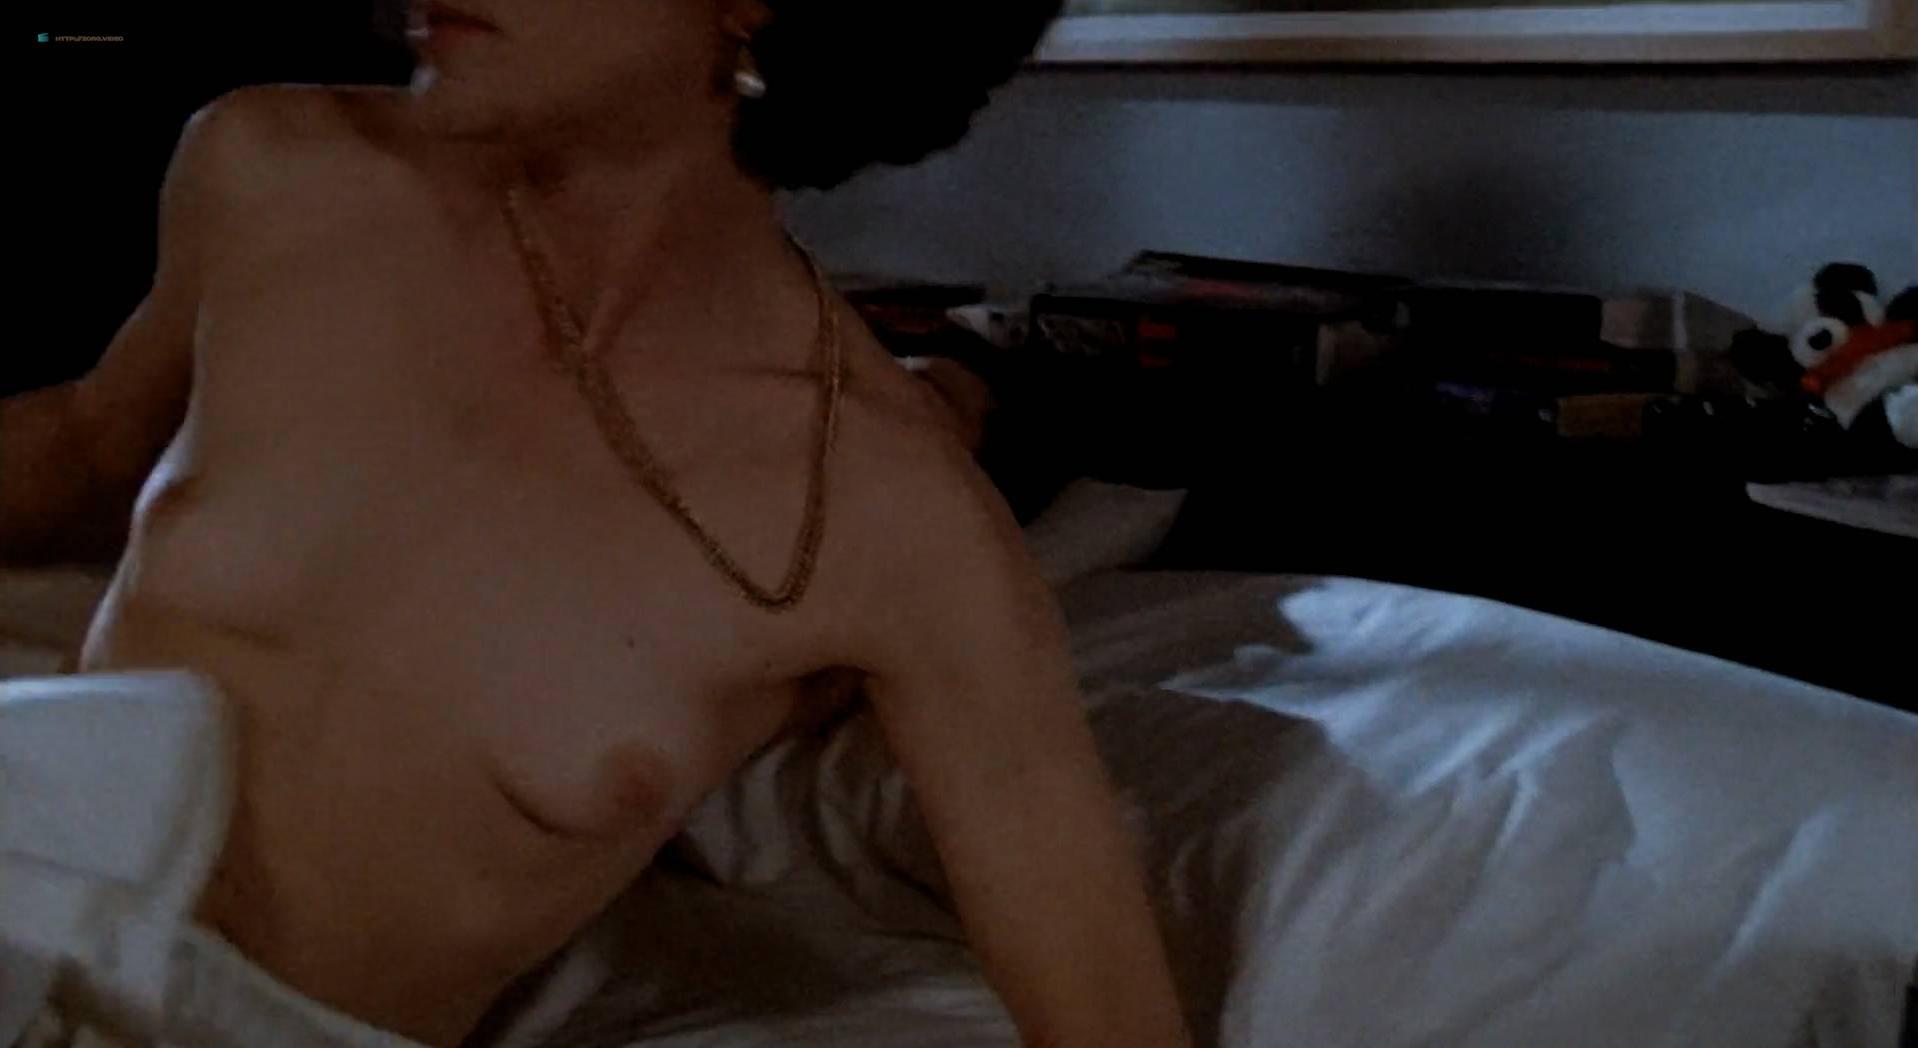 Jeremy Green nude, Lois Chiles nude - Creepshow 2 (1987) .